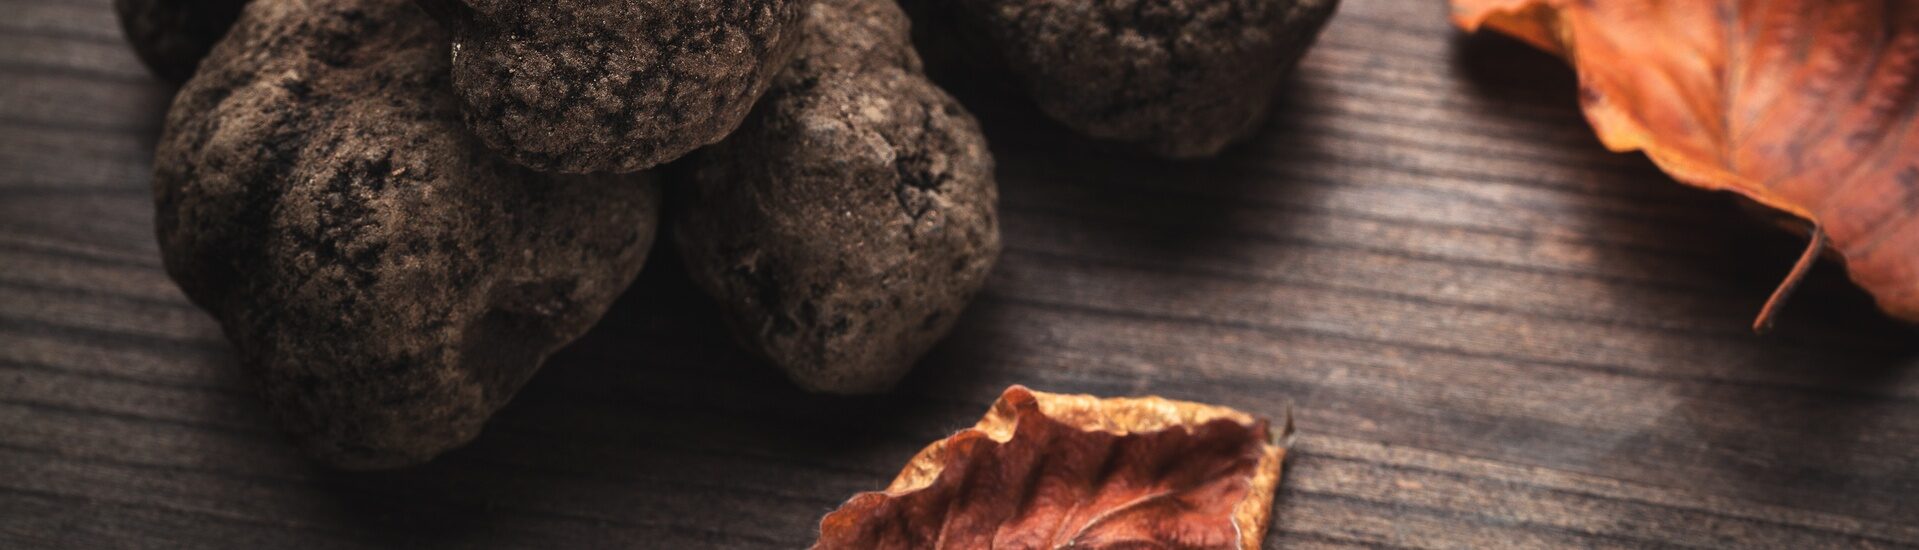 Are Truffle Congress Expenses Tax Deductible? by Alice Chapman